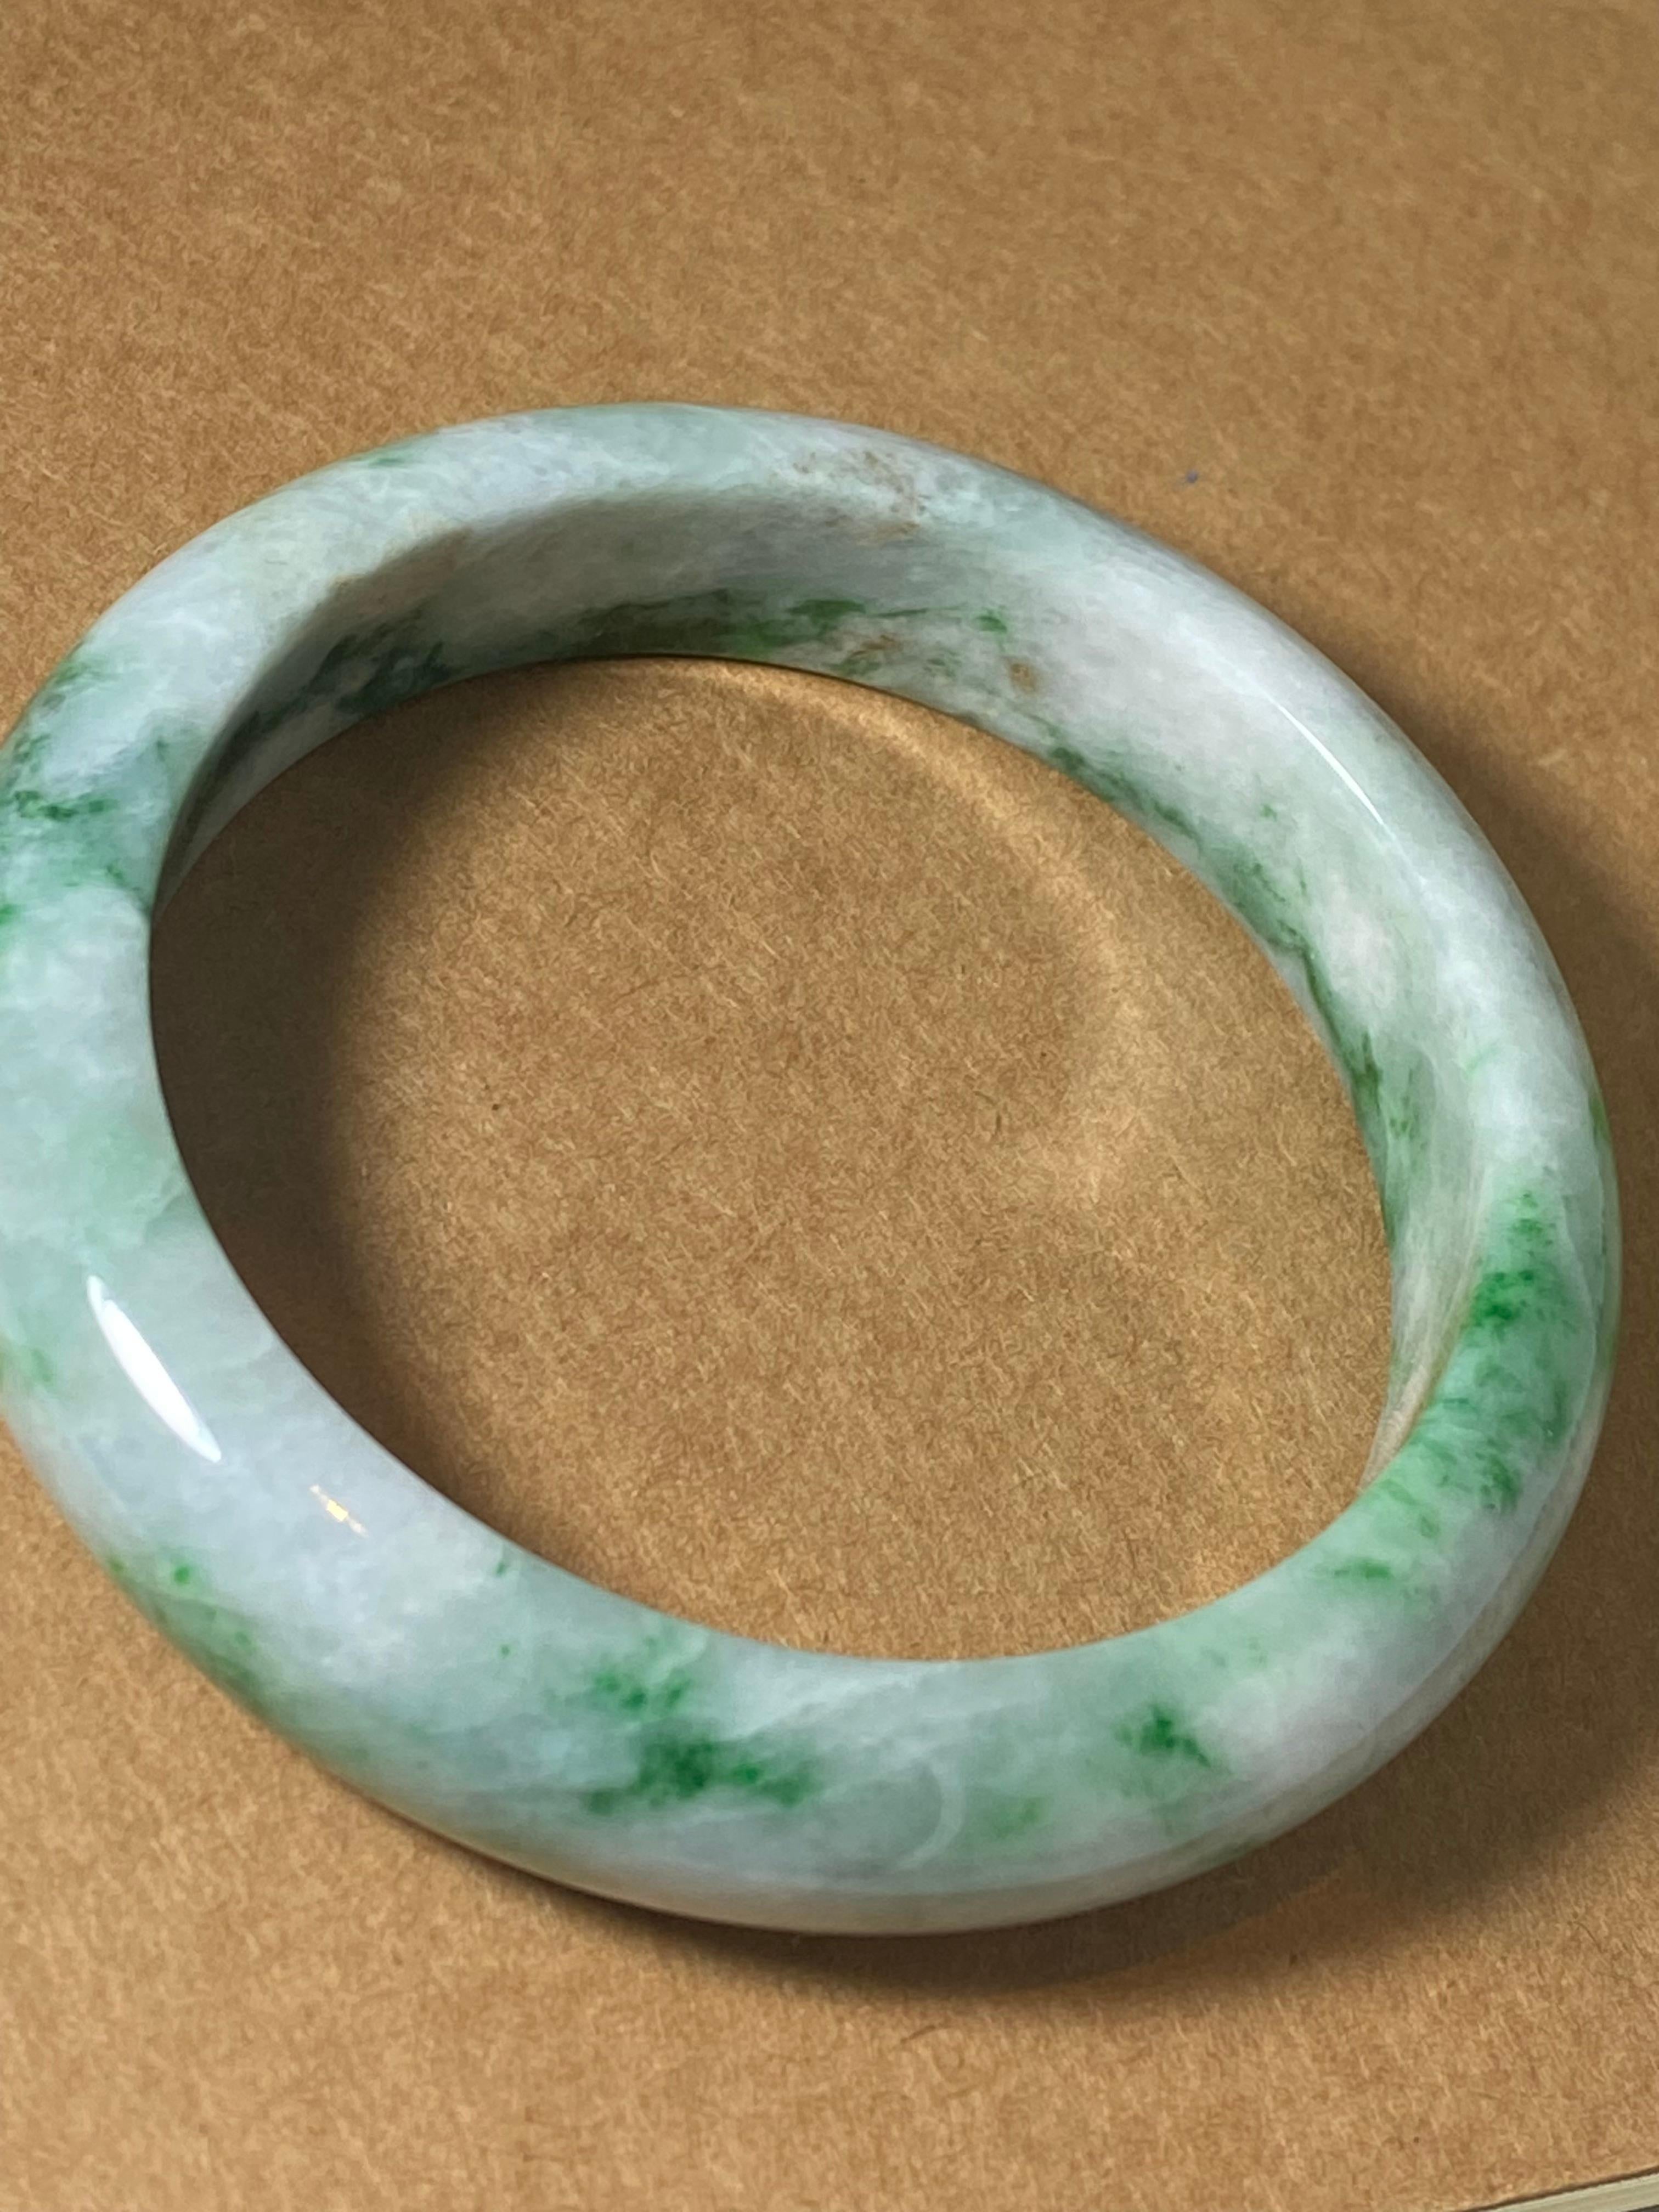 Women's Rounded Green & White Jade Bangle, 65.3gr. 15mm wide, 21cm circumference. For Sale